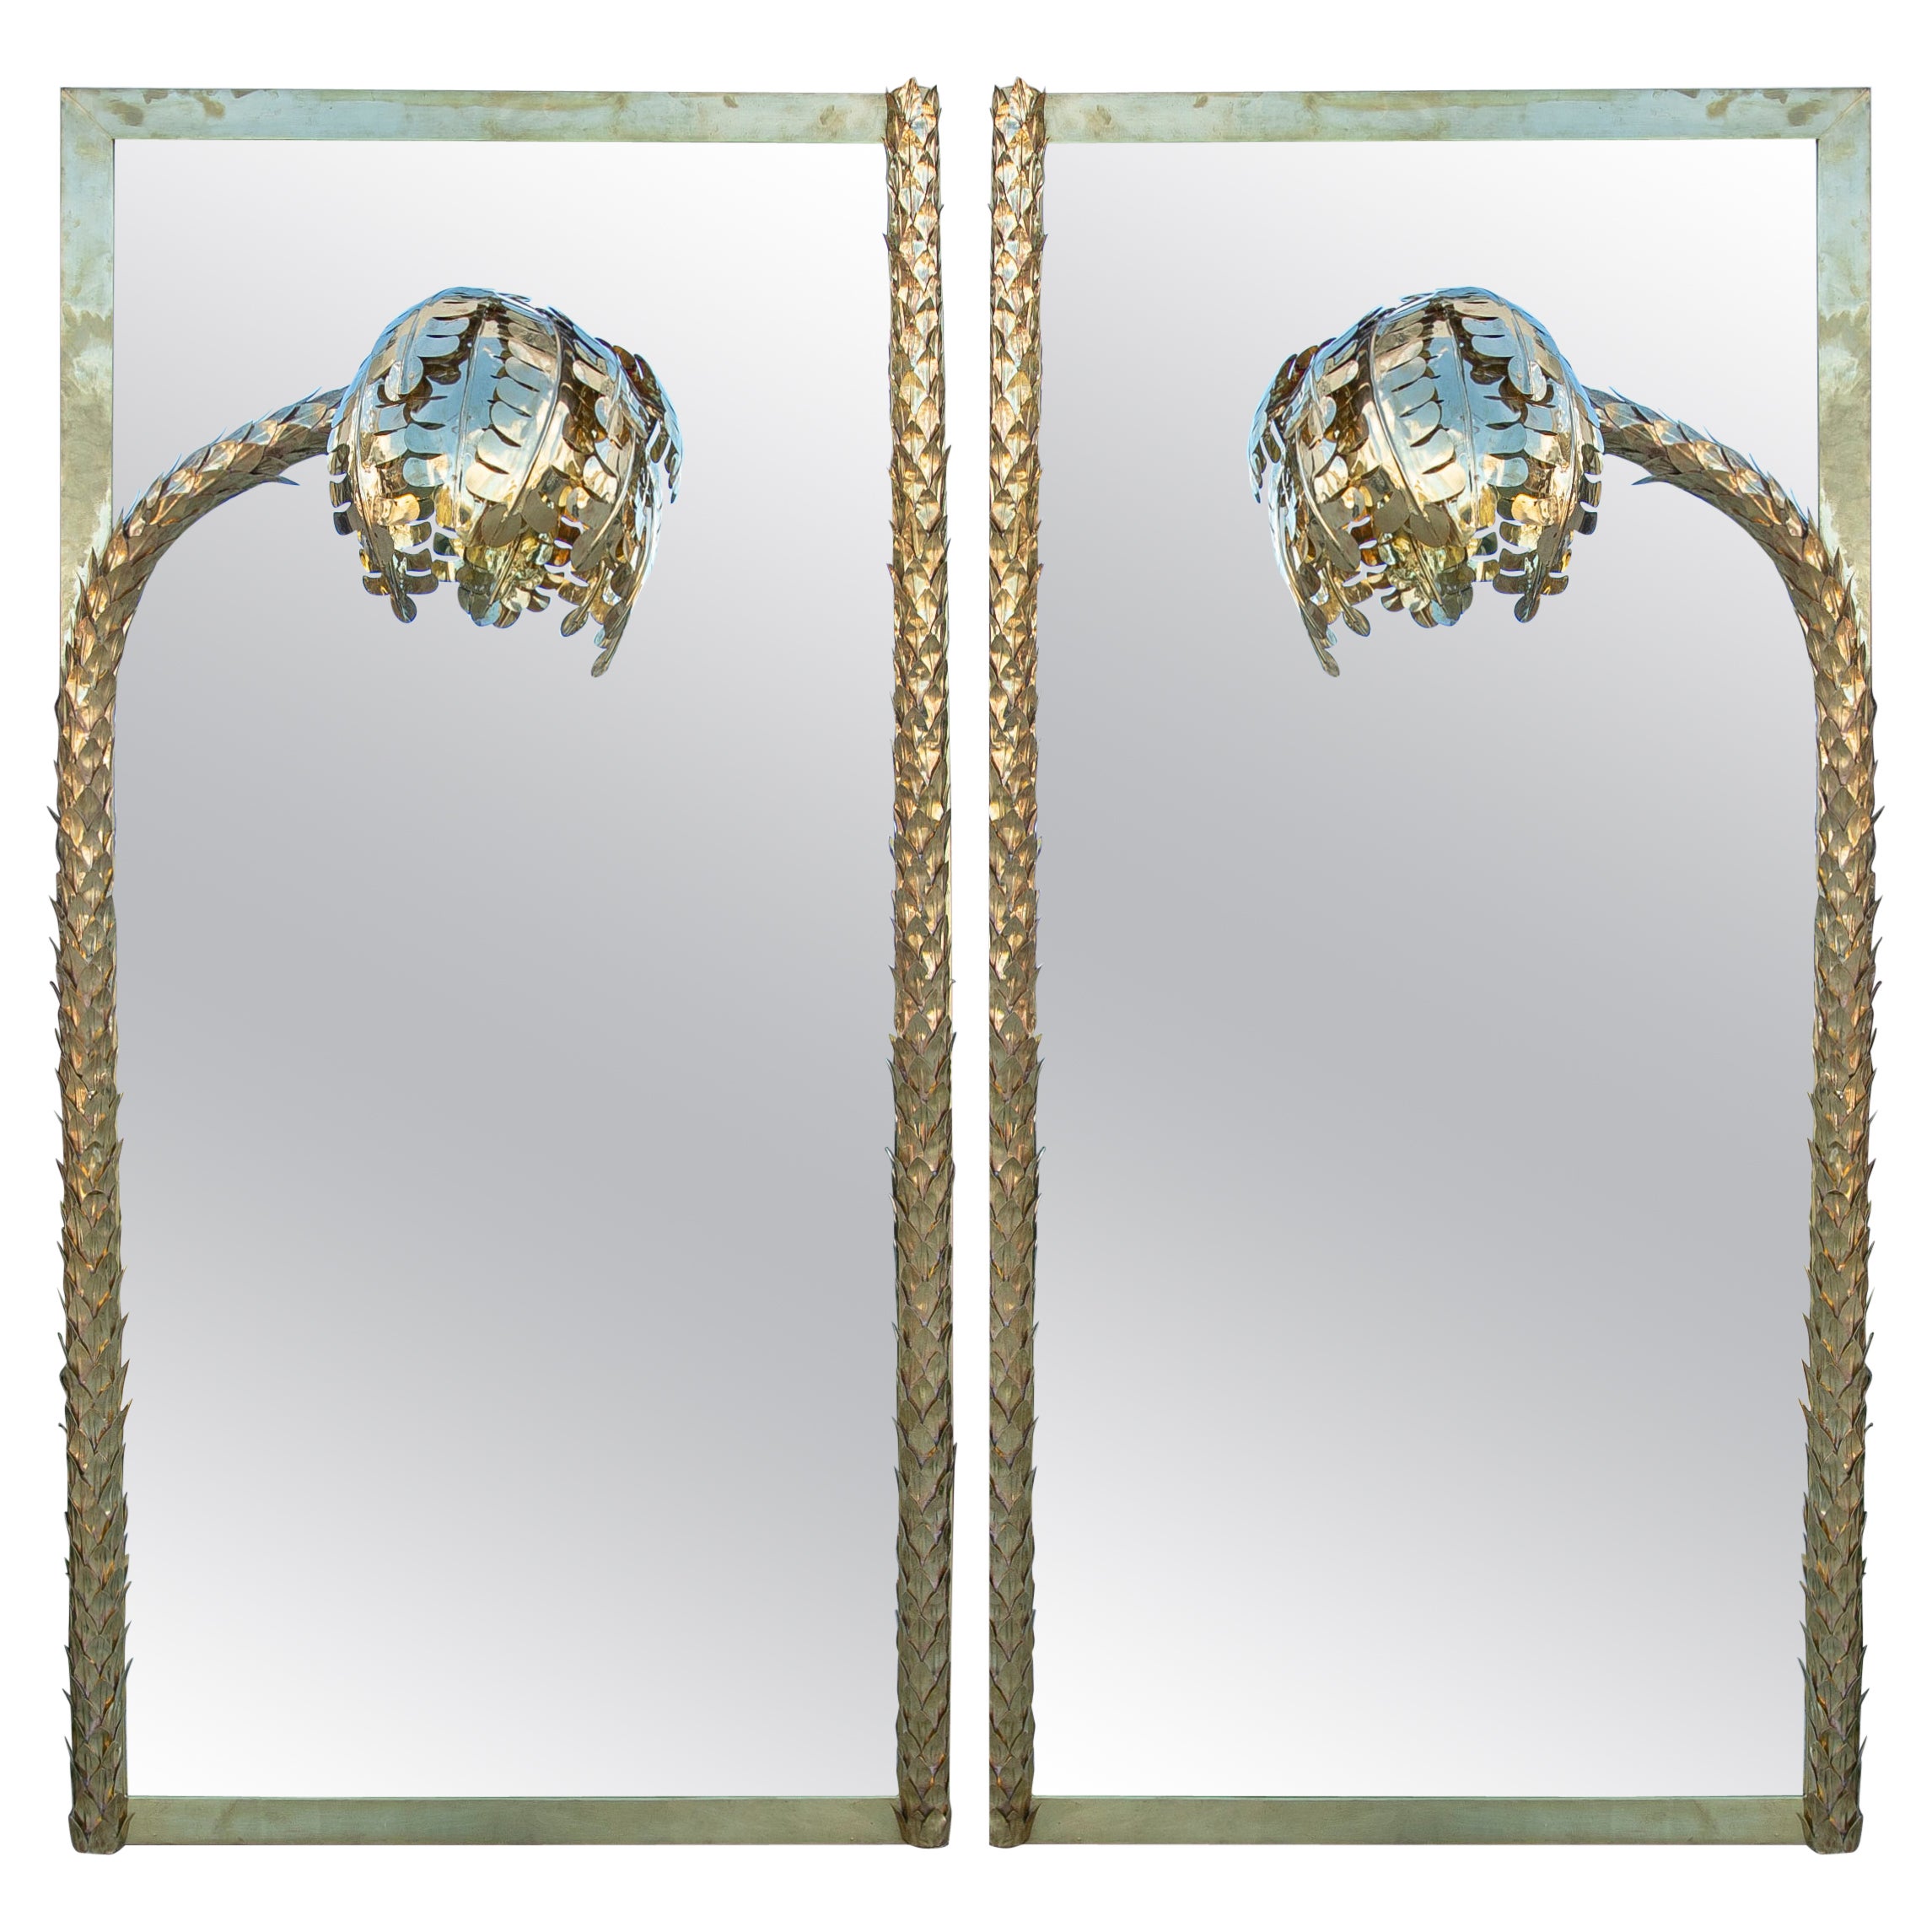 Pair of Brass Wall Mirrors with Palm Tree Decoration in the Middle